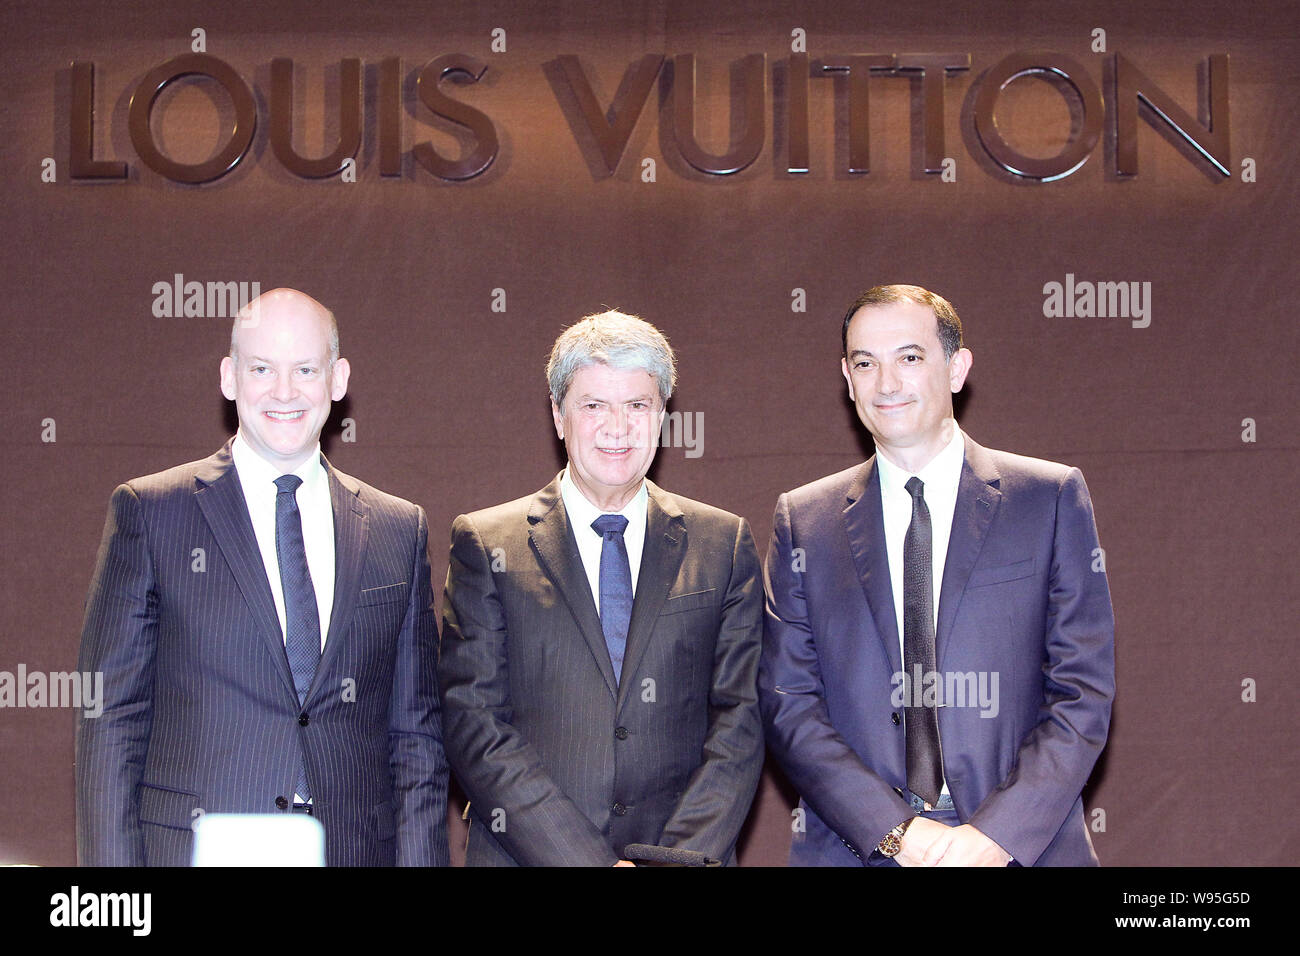 Louis vuitton executives hi-res stock photography and images - Alamy